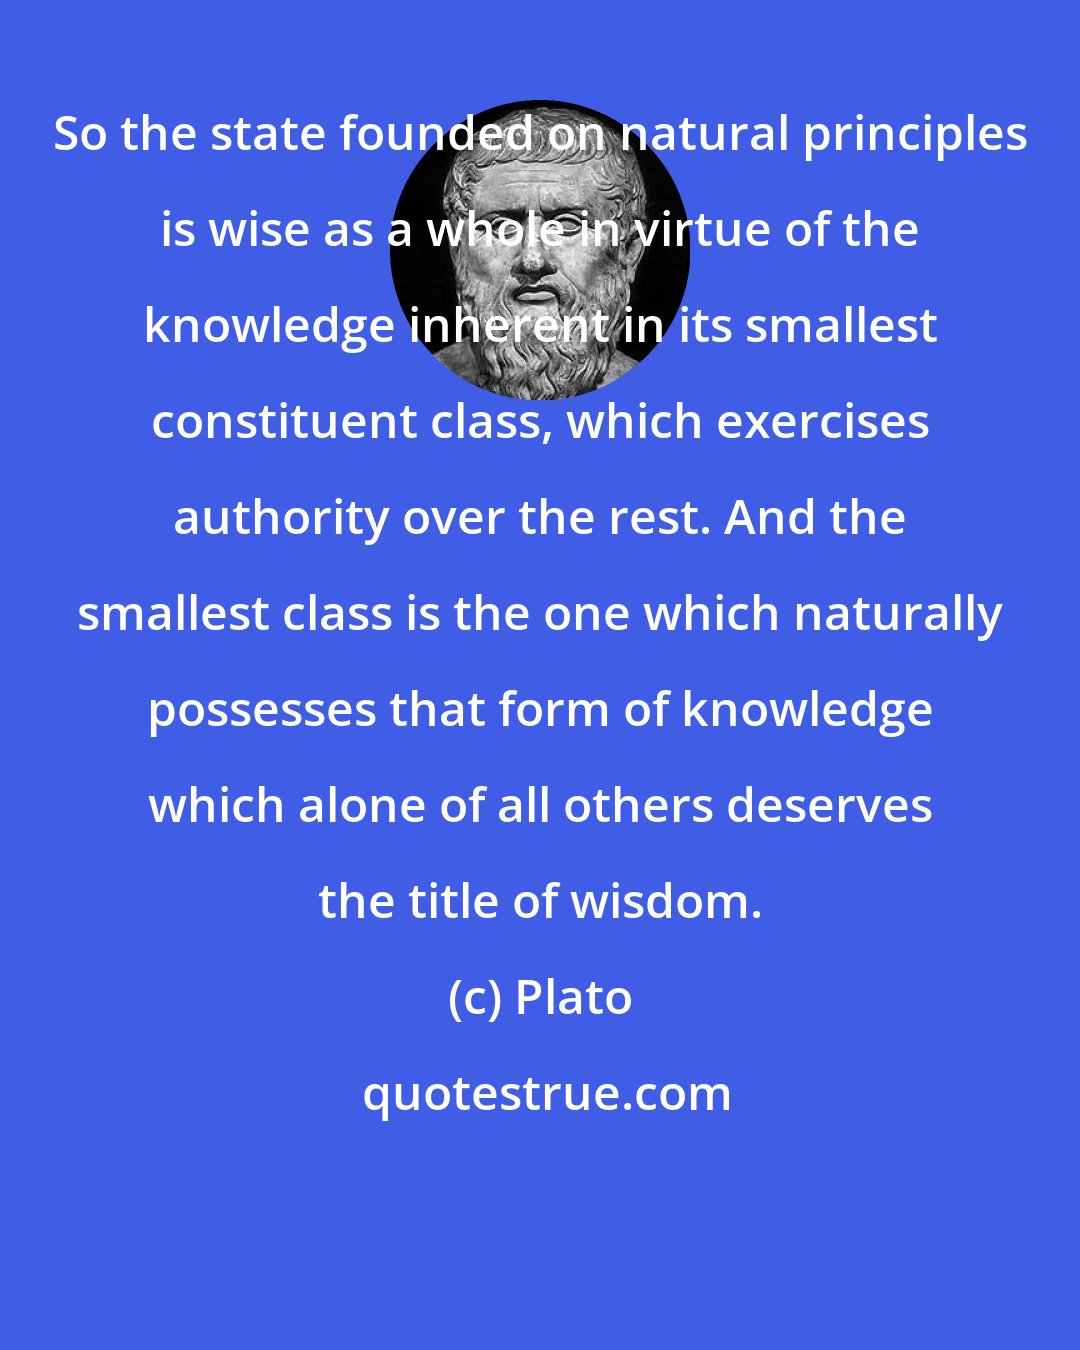 Plato: So the state founded on natural principles is wise as a whole in virtue of the knowledge inherent in its smallest constituent class, which exercises authority over the rest. And the smallest class is the one which naturally possesses that form of knowledge which alone of all others deserves the title of wisdom.